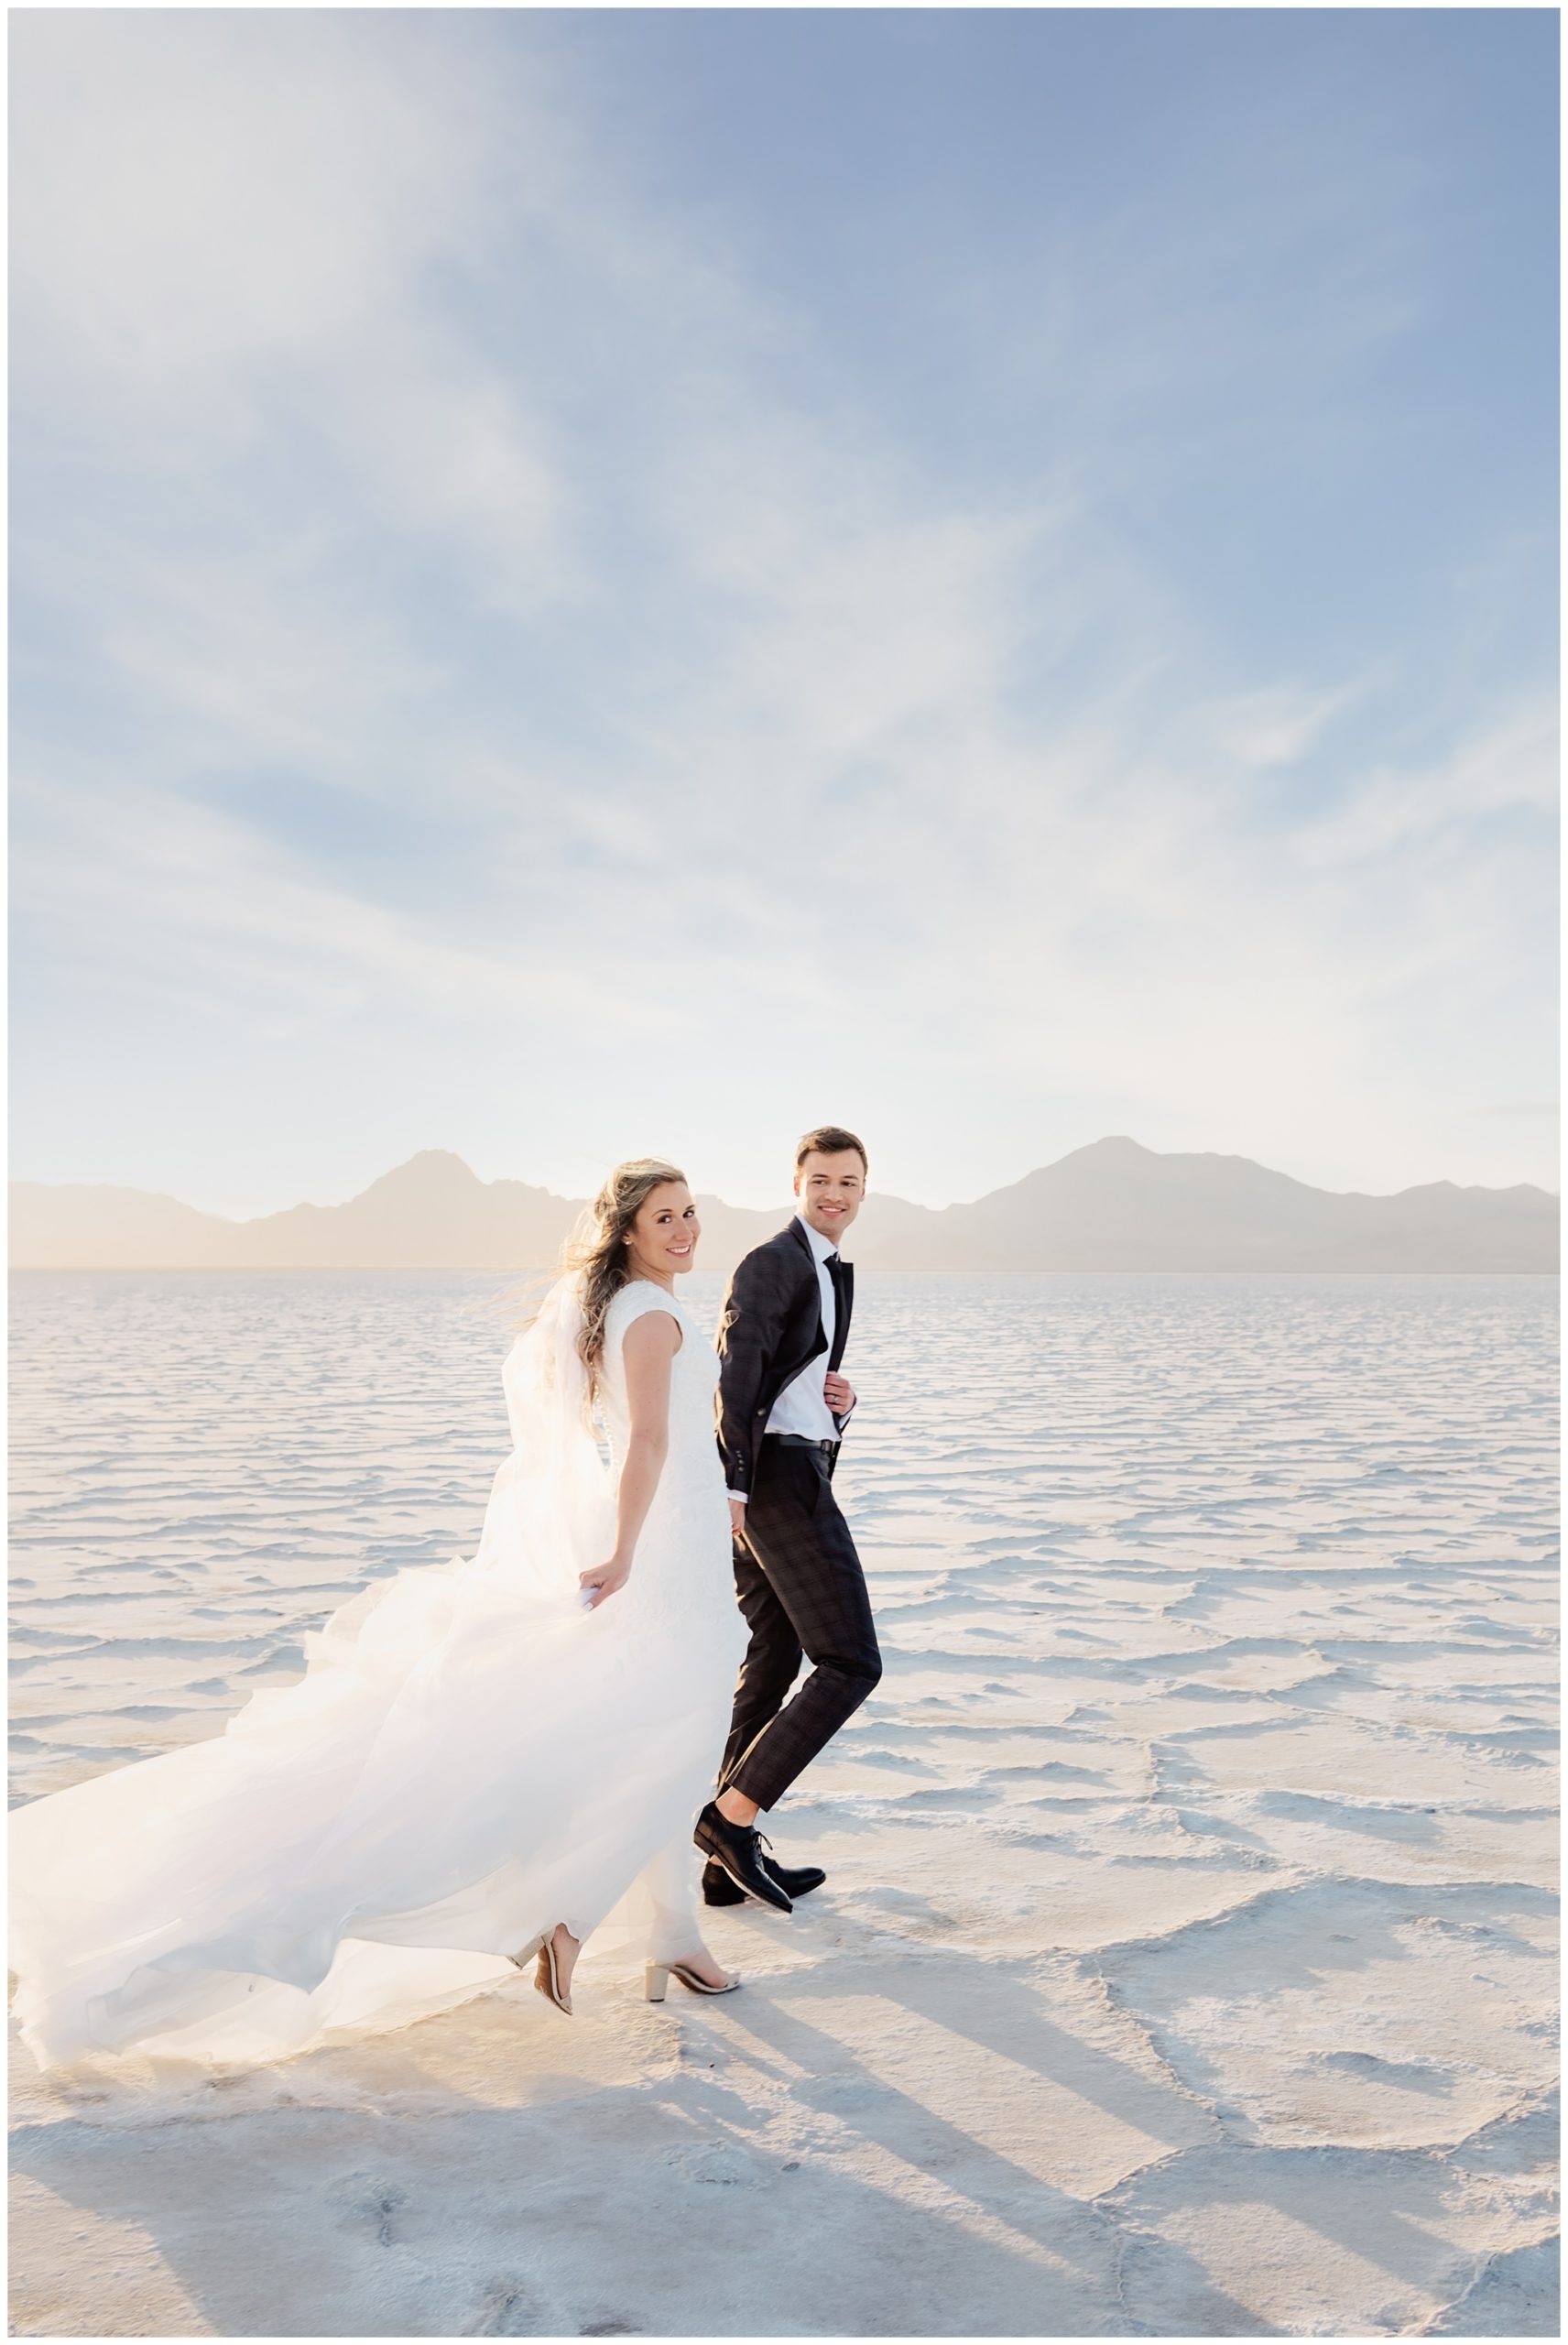 Utah Salt flats bride and groom taking pictures at sunset